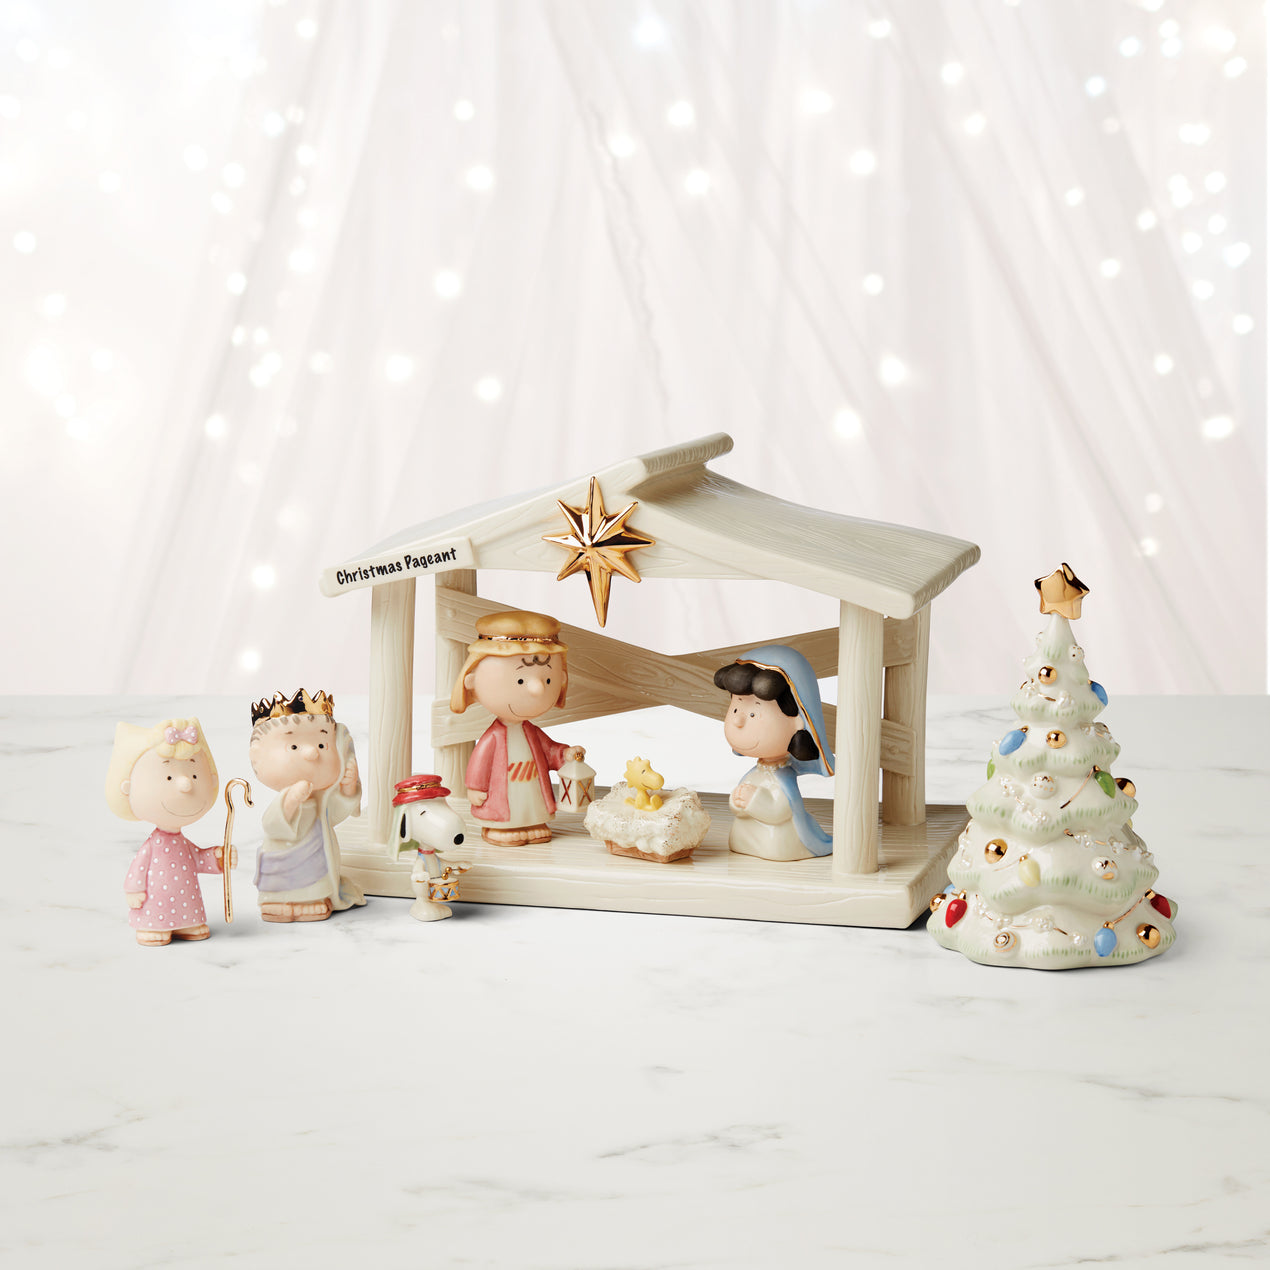 Peanuts The Christmas Pageant Creche with Star – Lenox Corporation